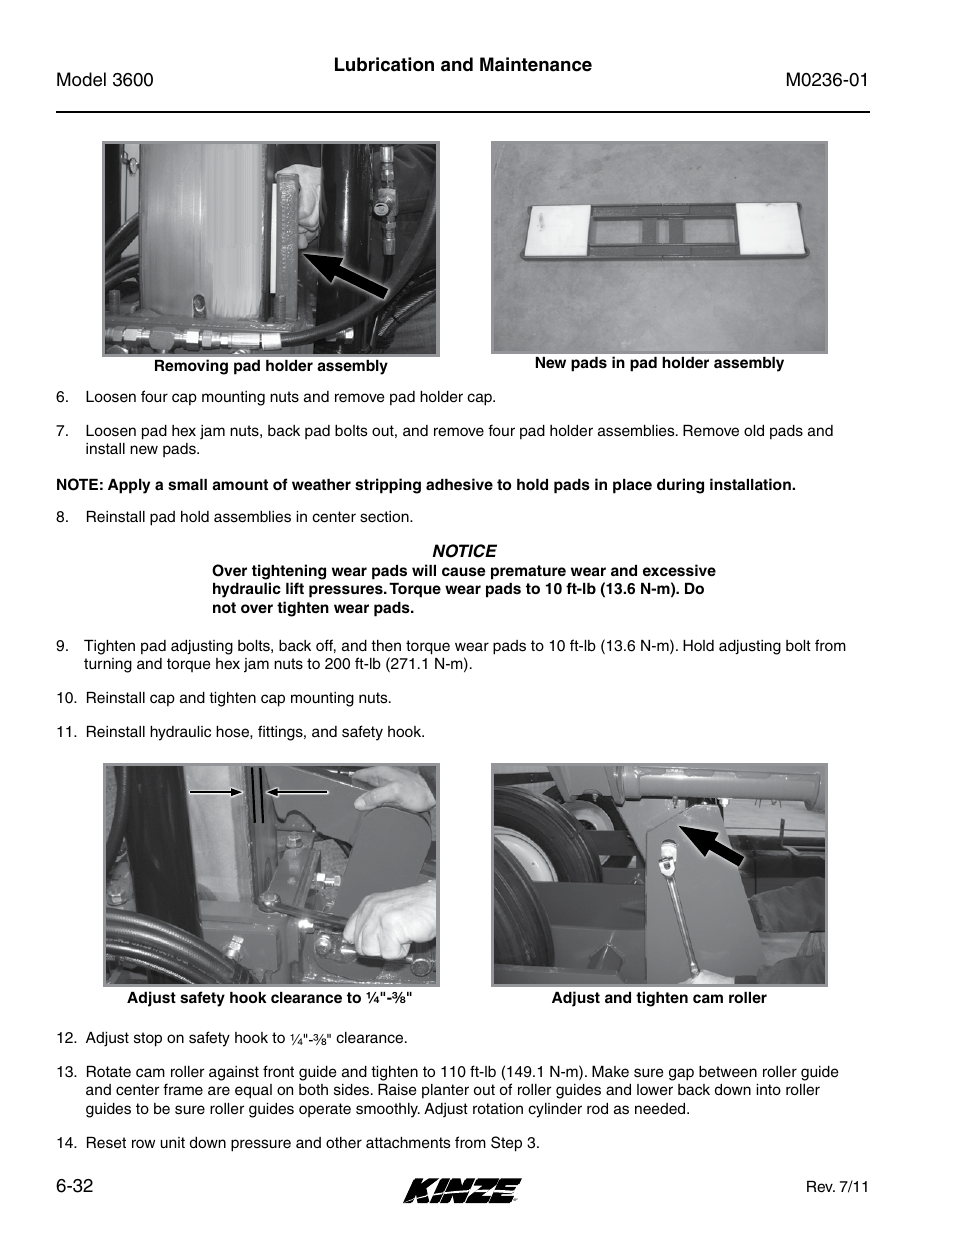 Kinze 3600 Lift and Rotate Planter Rev. 7/14 User Manual | Page 140 / 172